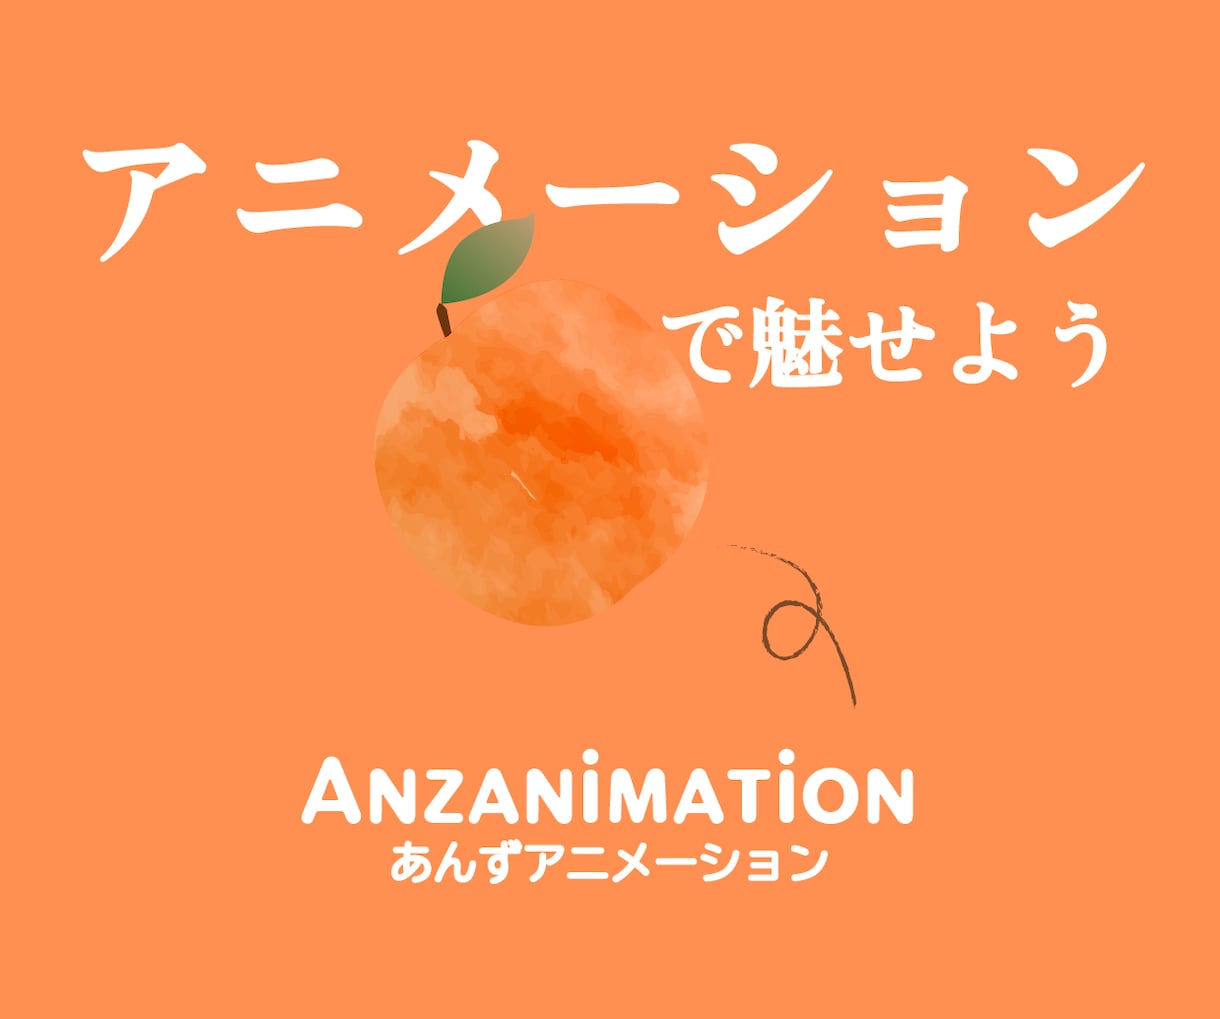 💬Coconala｜We produce all kinds of animation for the web
               anzu animation
                5.0
…